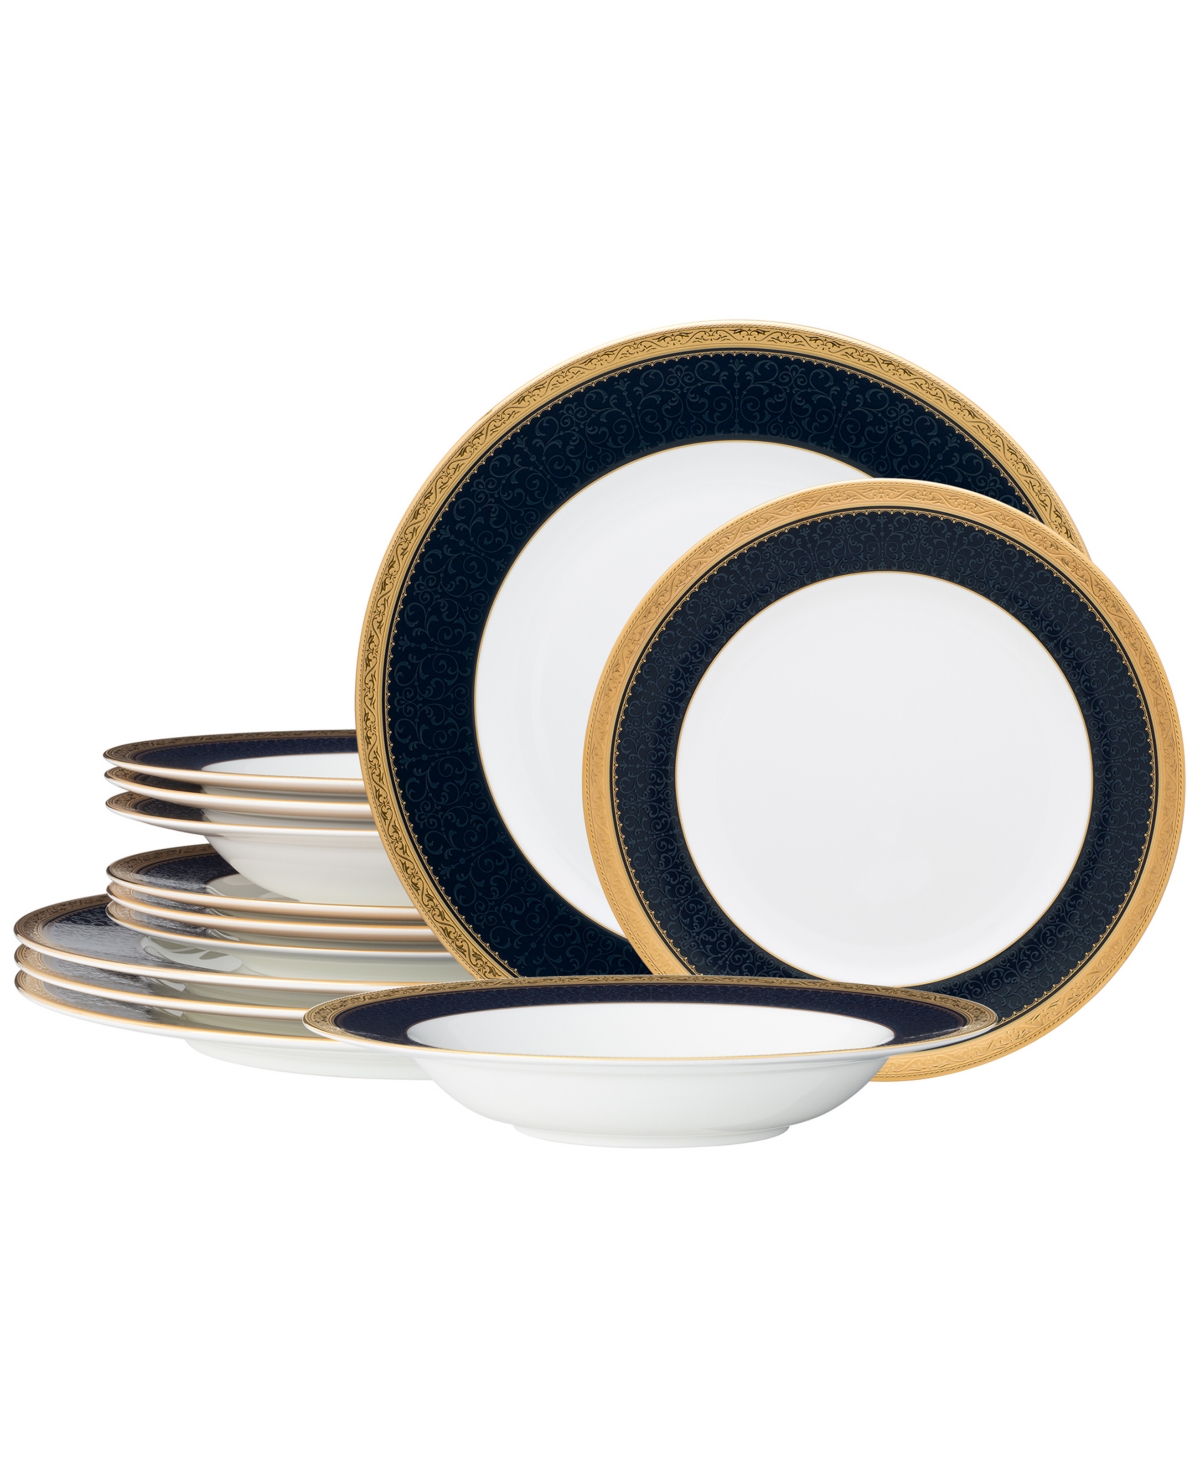 Noritake Odessa Cobalt 12 Piece Set, Service For 4 In Blue And Gold-tone